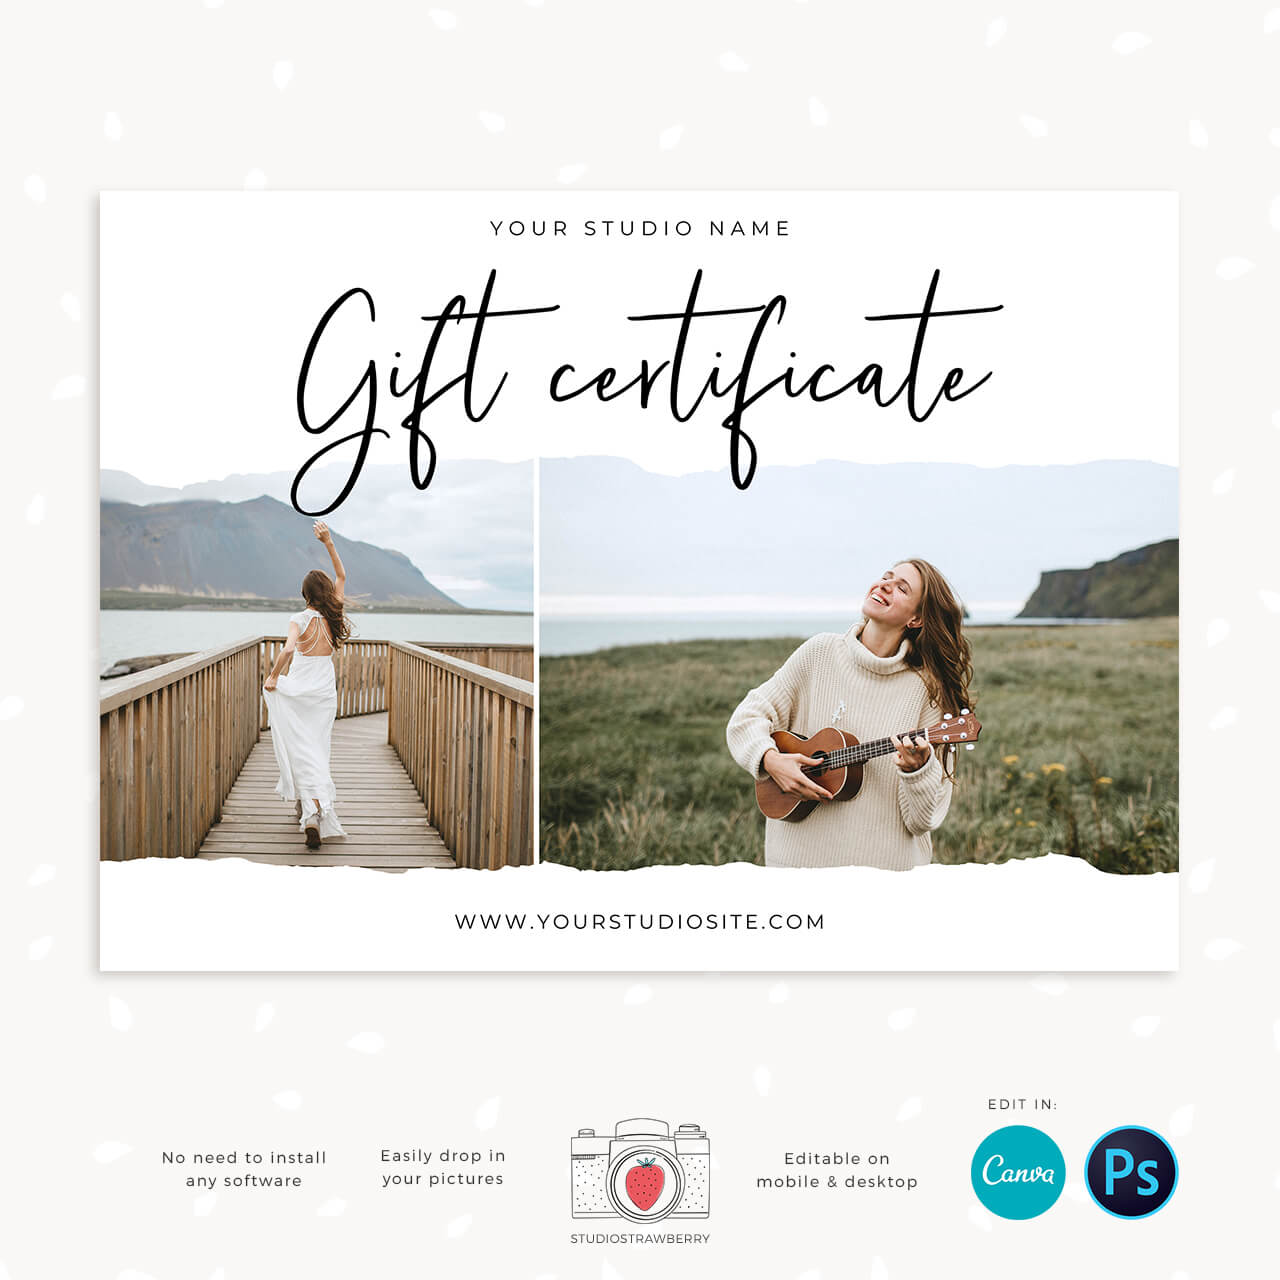 photography gift certificate printable